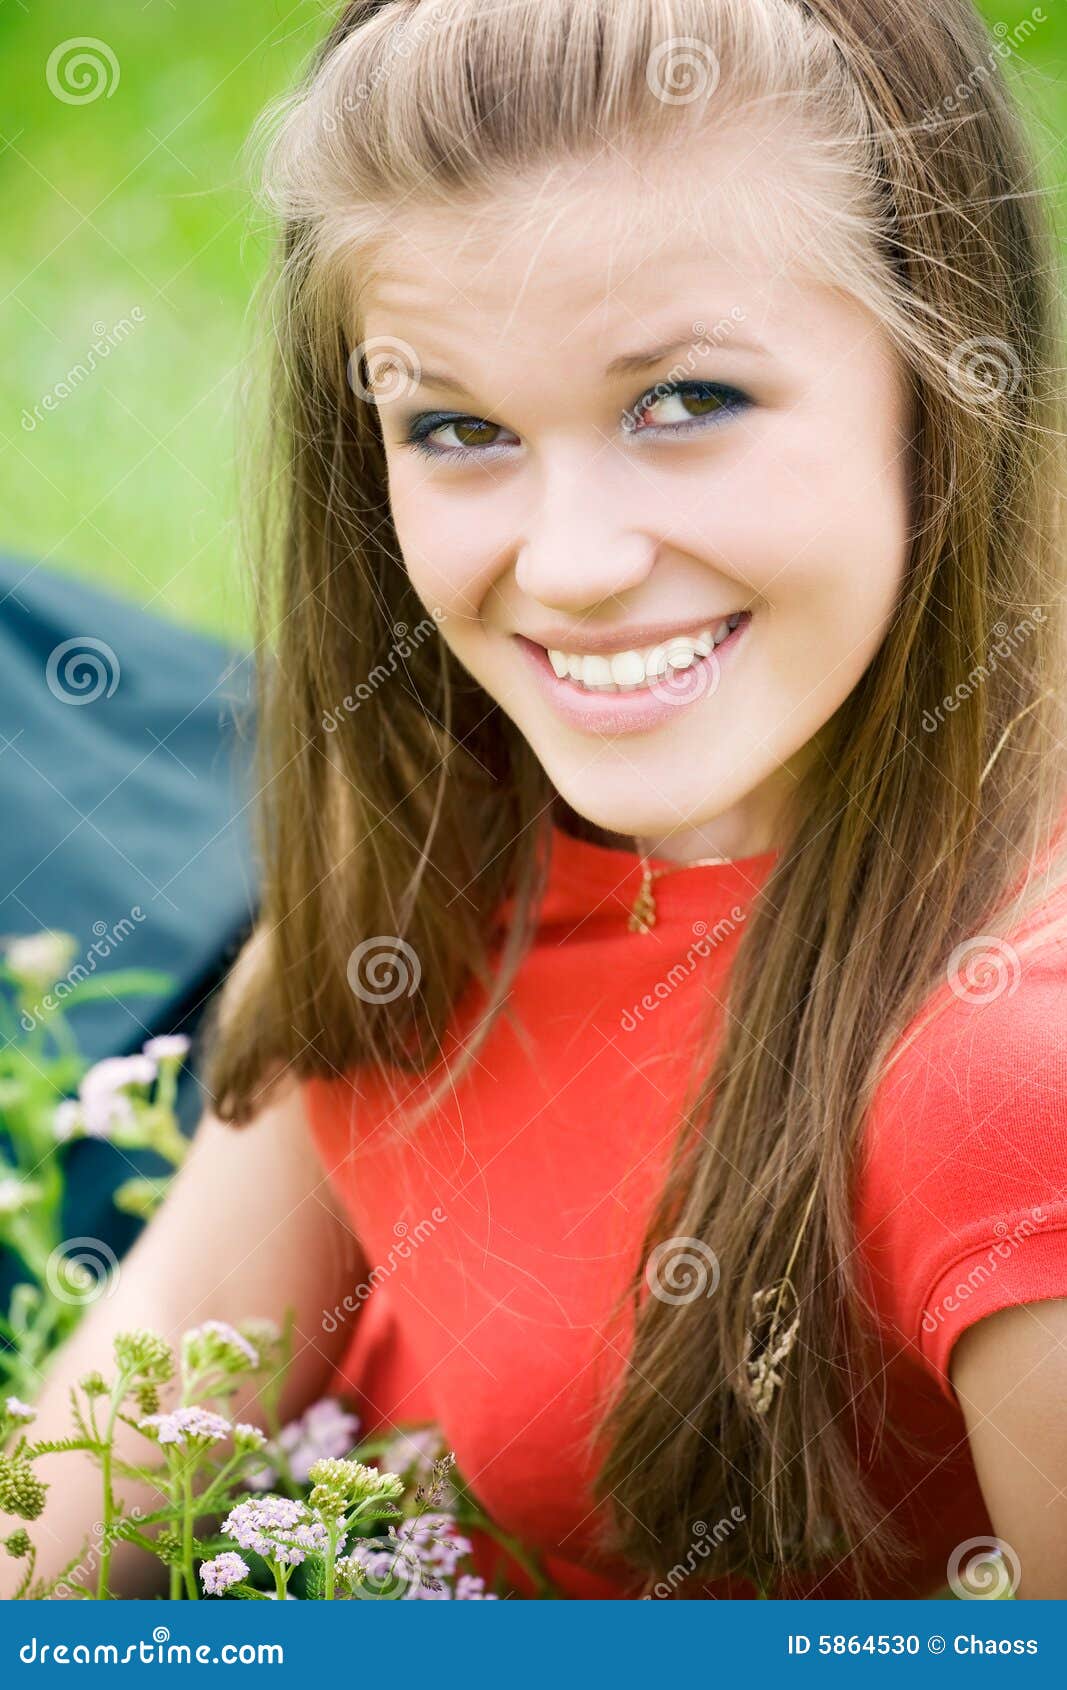 https://thumbs.dreamstime.com/z/young-happy-woman-5864530.jpg